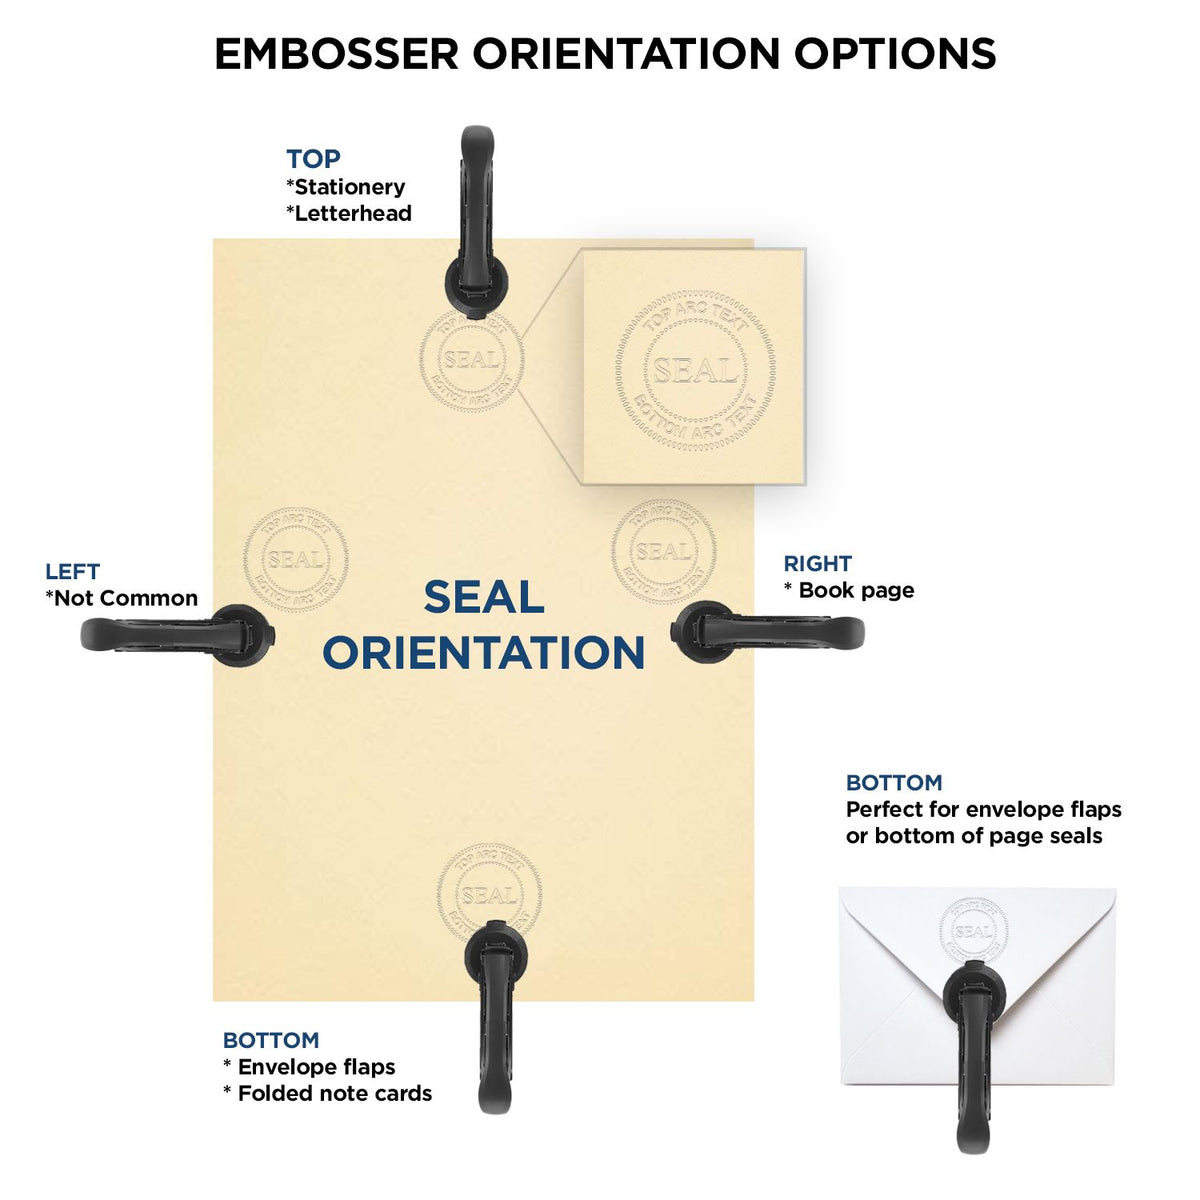 An infographic for the Handheld New Mexico Professional Geologist Embosser showing embosser orientation, this is showing examples of a top, bottom, right and left insert.